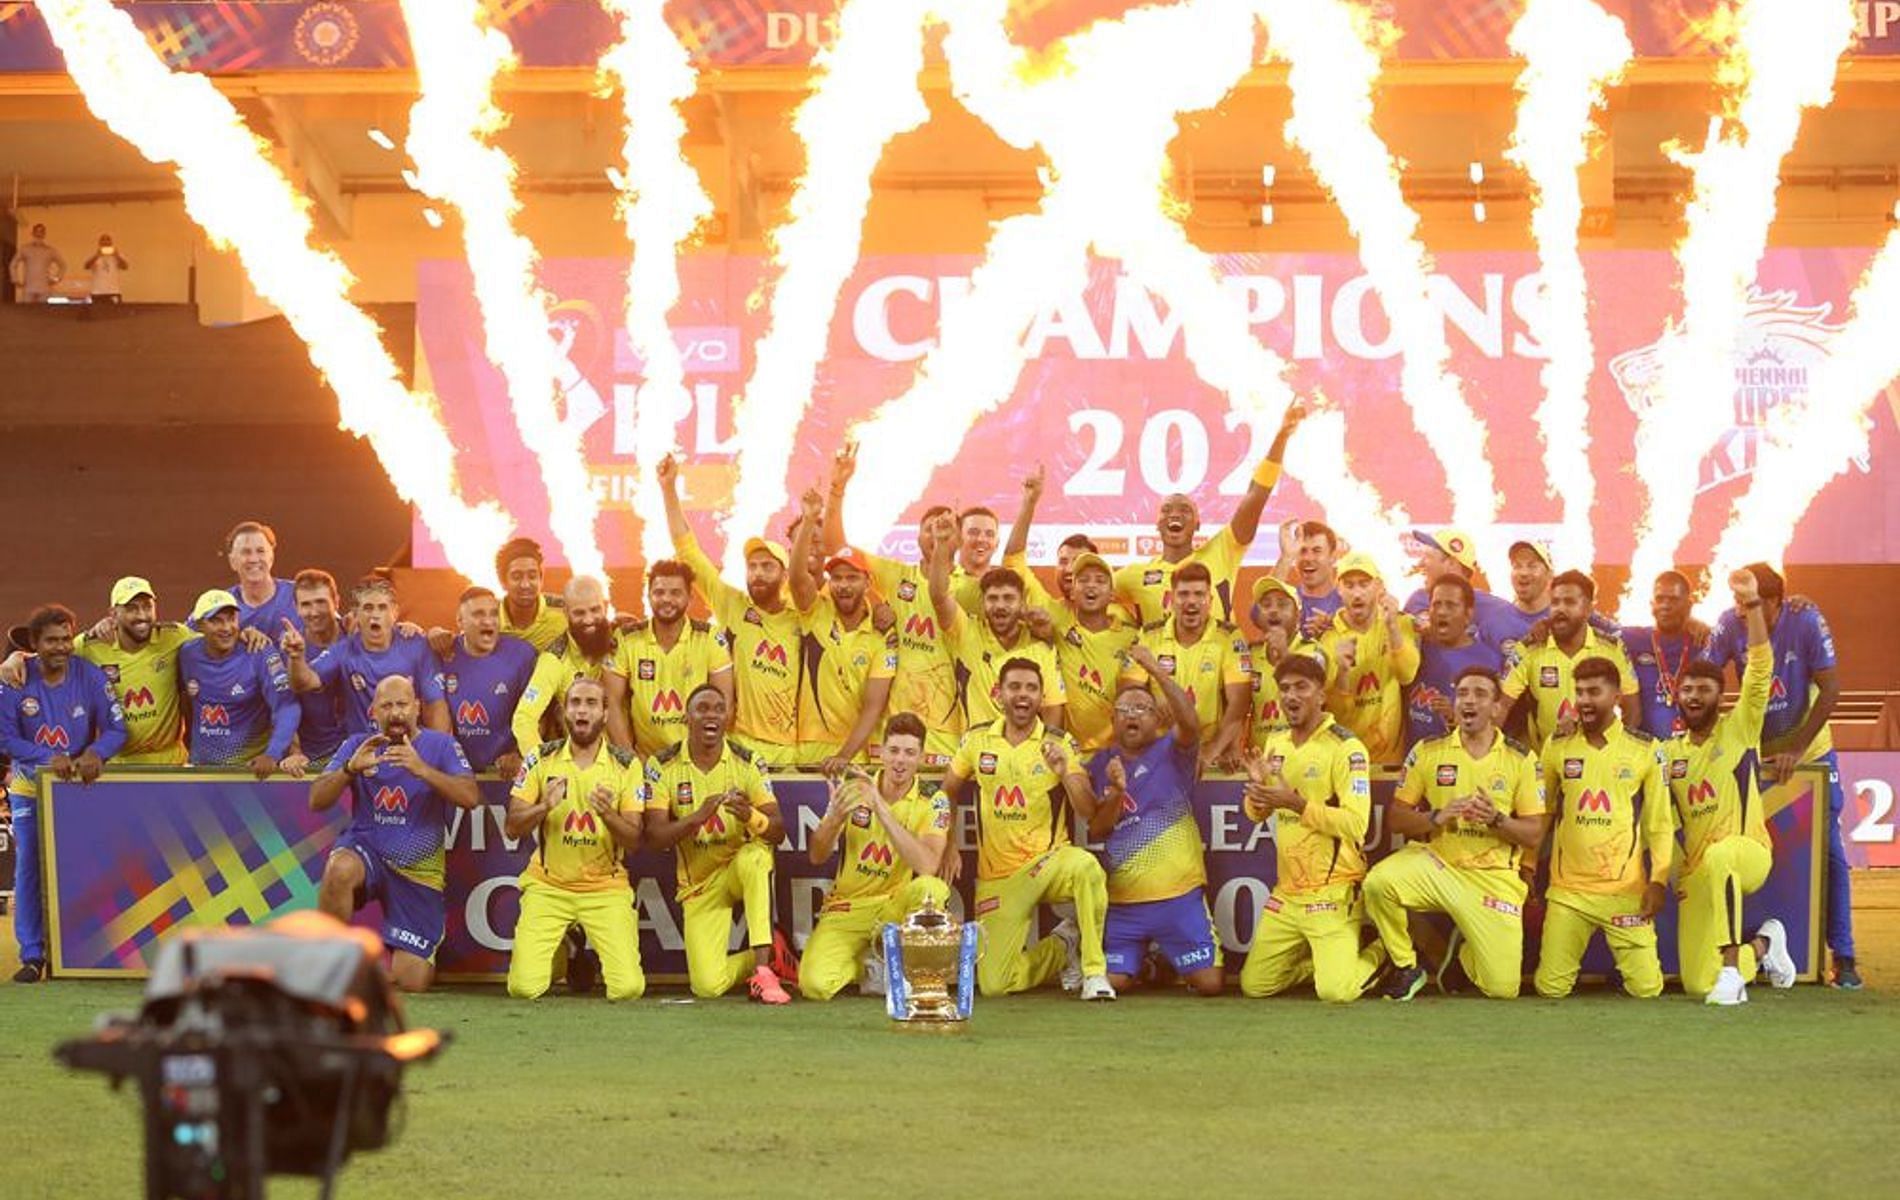 CSK won the IPL 2021 title after a disappointing outing in the previous season.